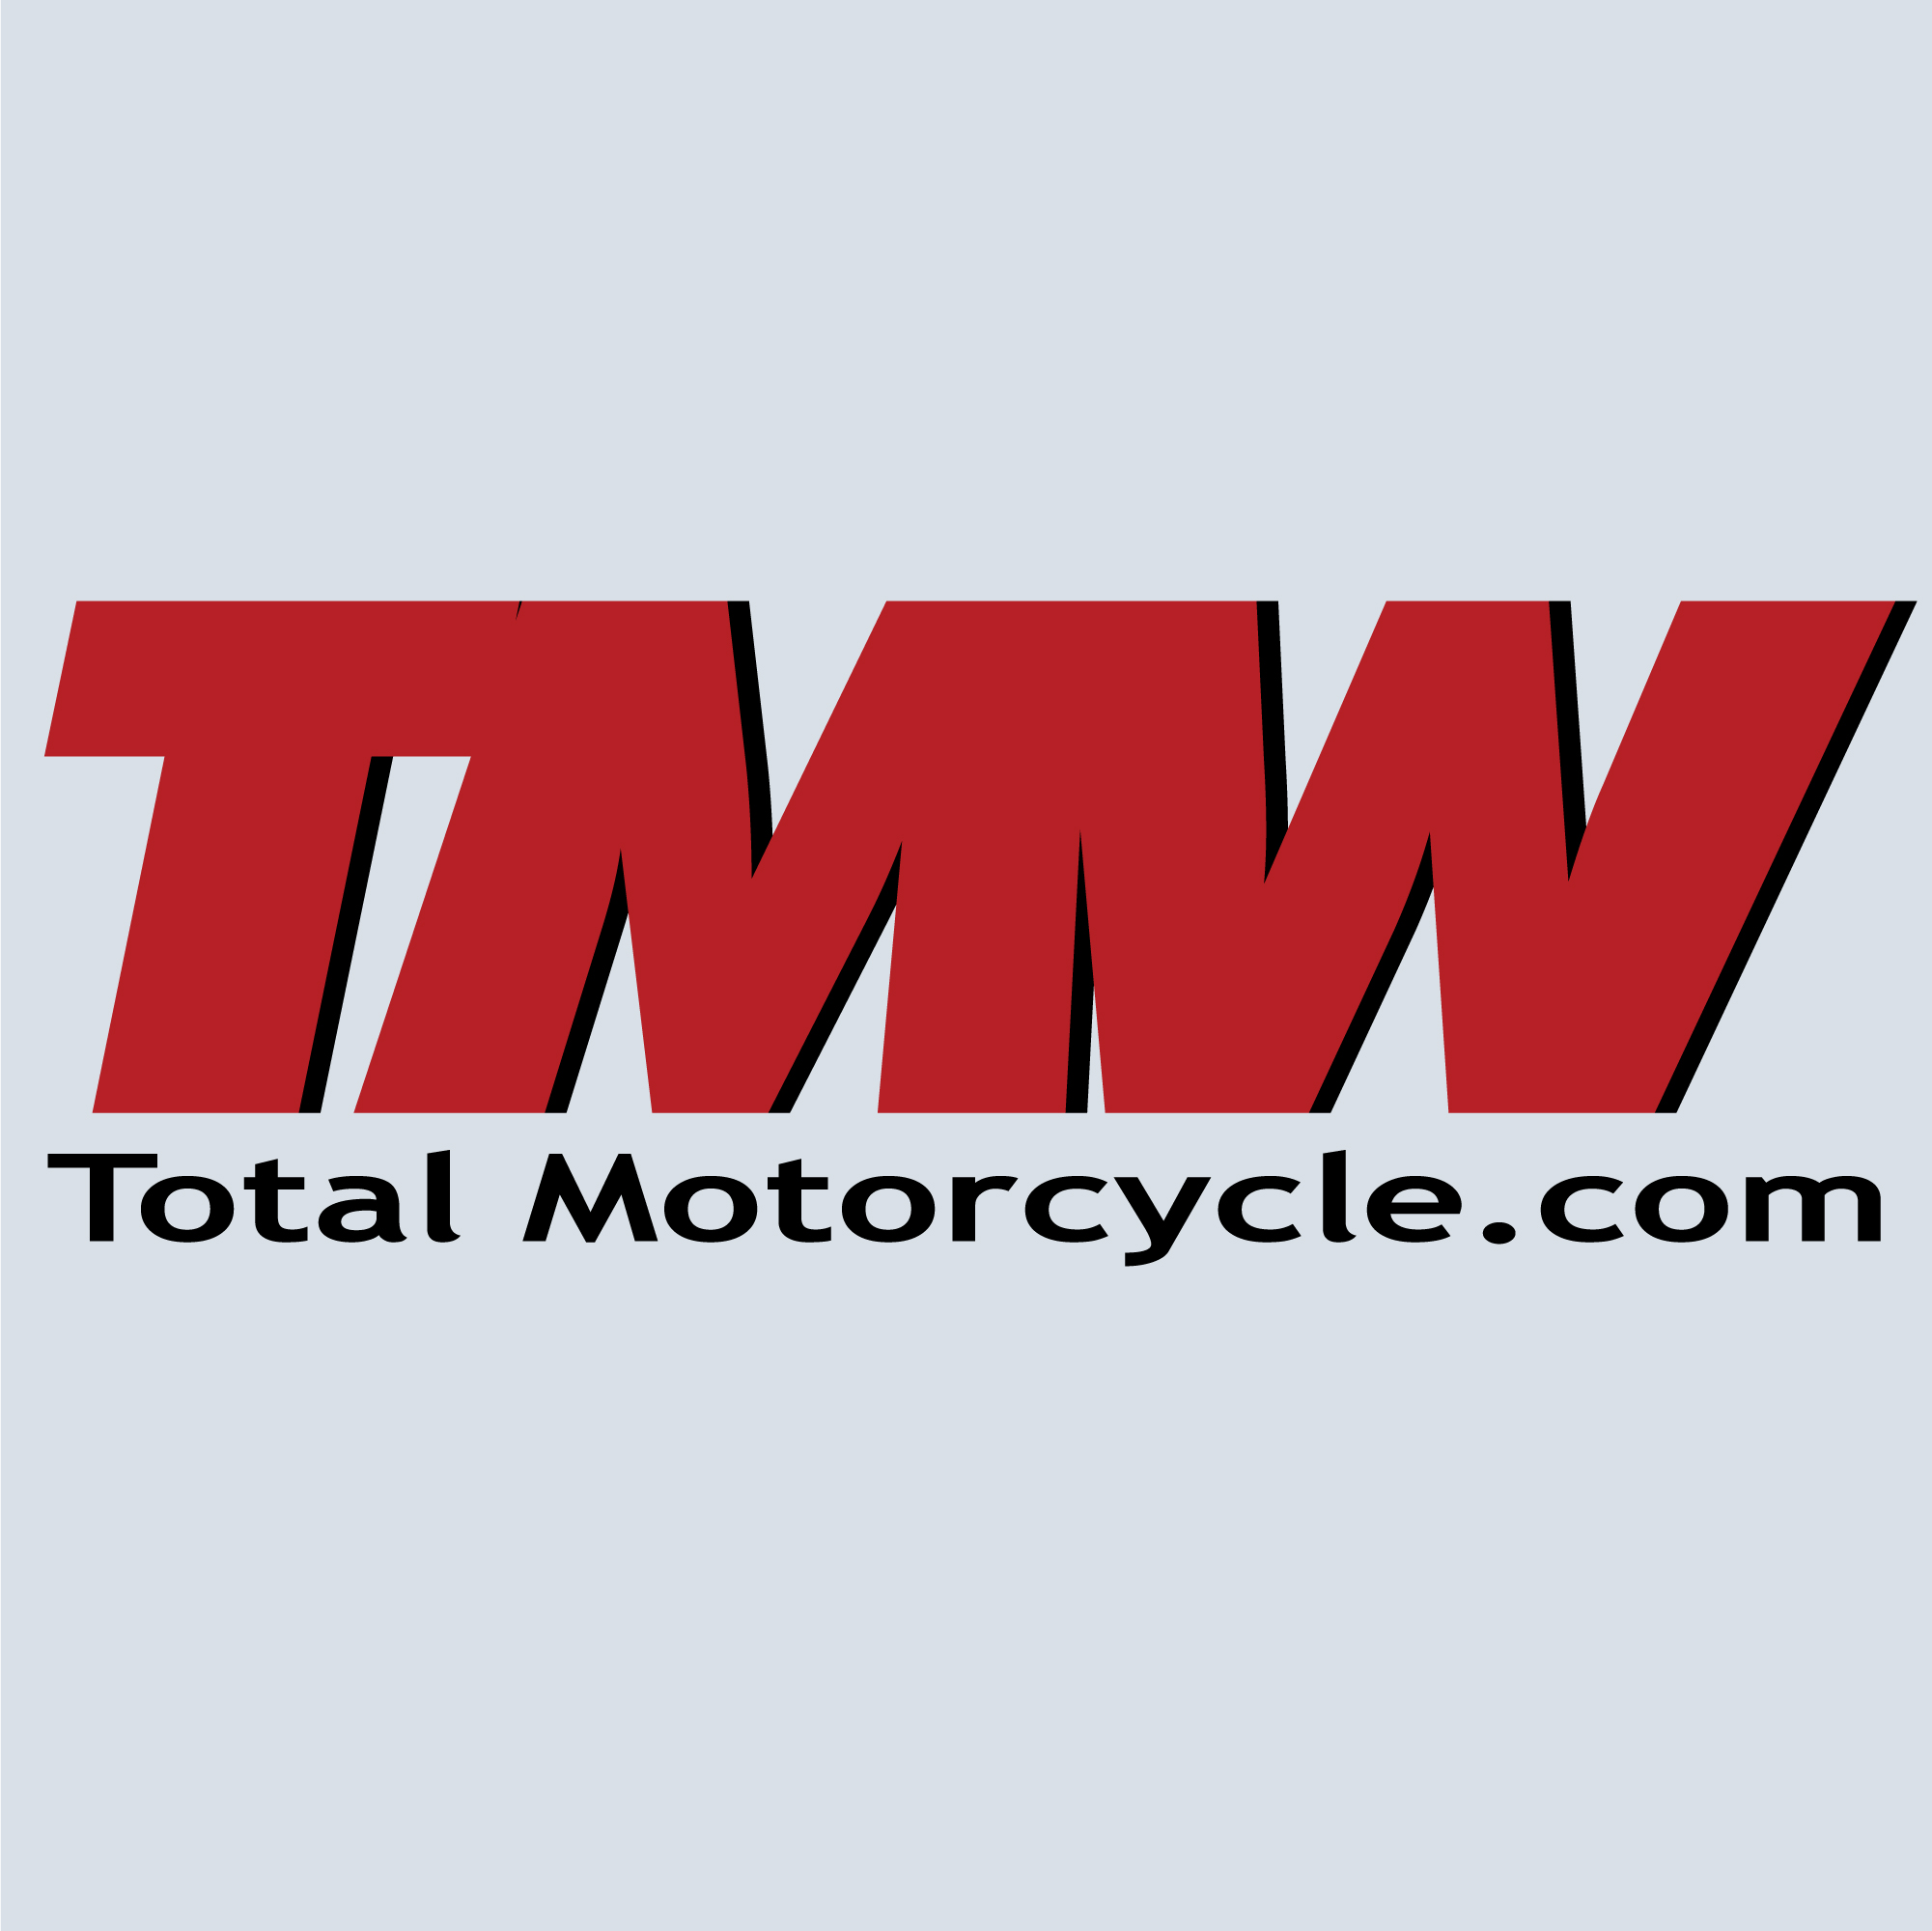 www.totalmotorcycle.com